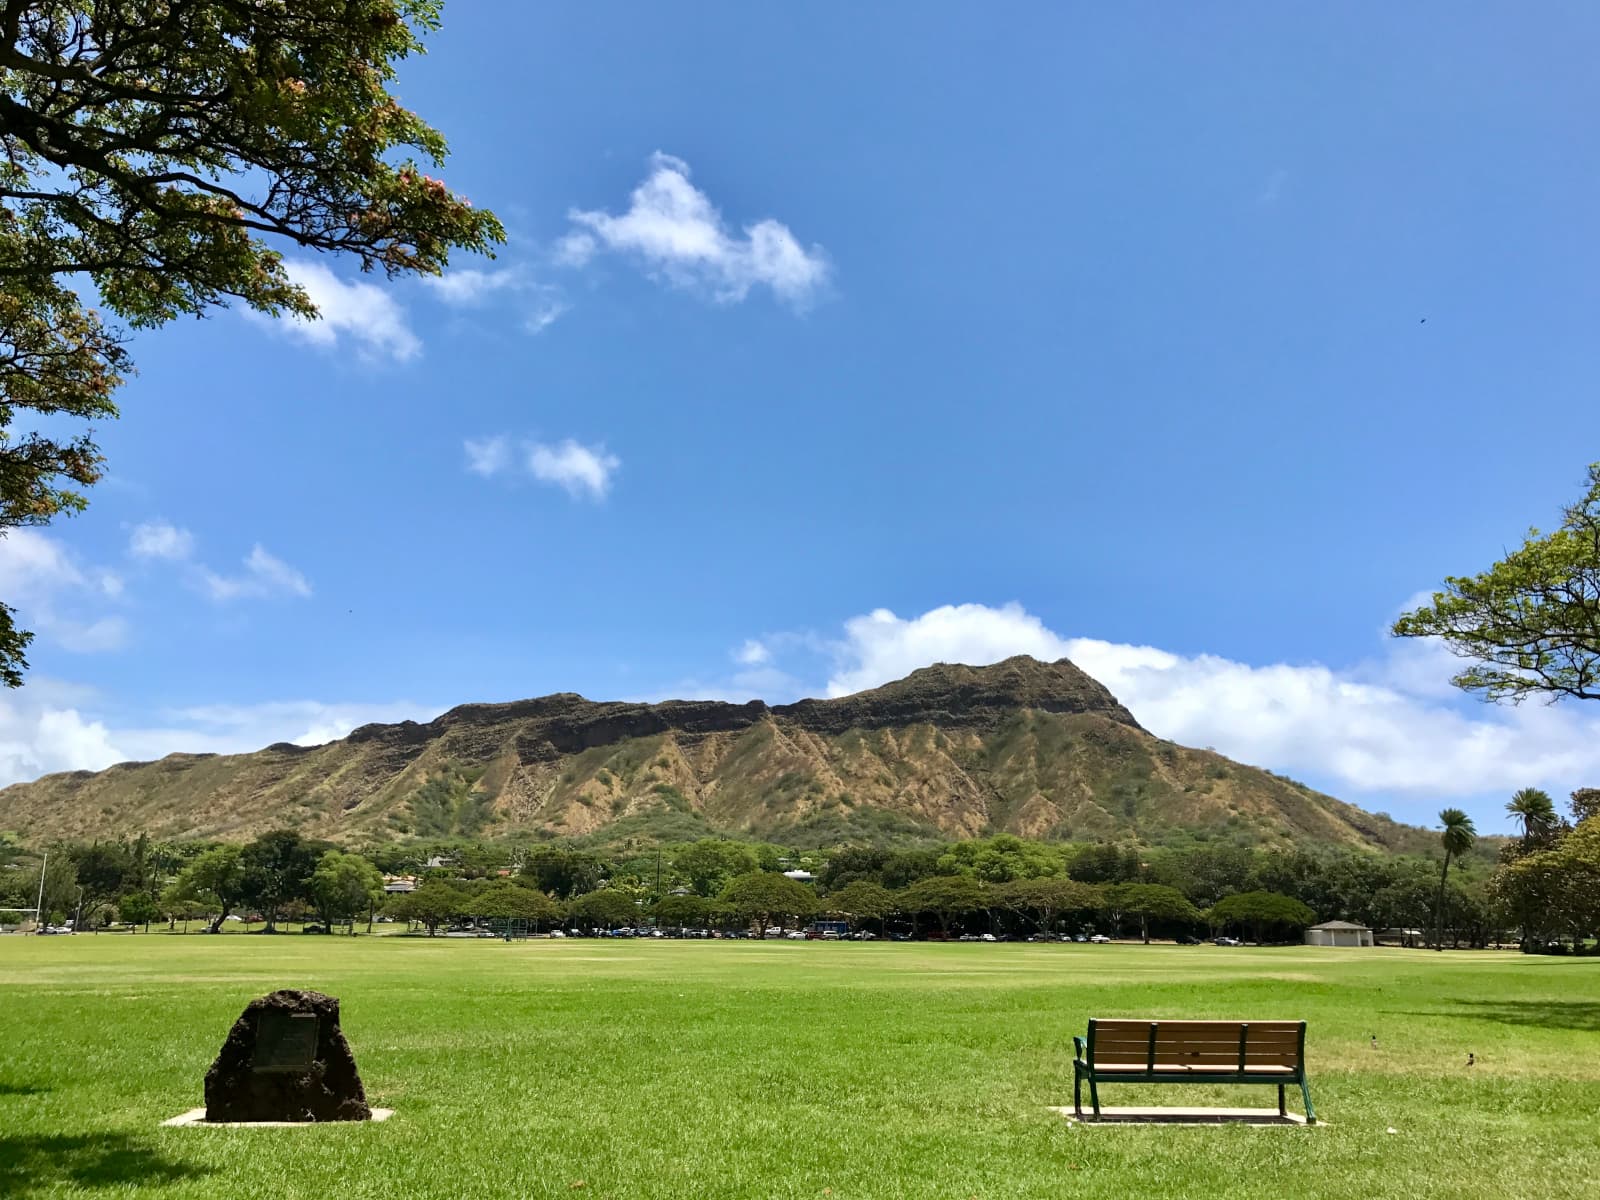 Picture taken in Kapiolani Park with a bench and rock in foreground, large open green space in the middle, and Diamond Head in the background